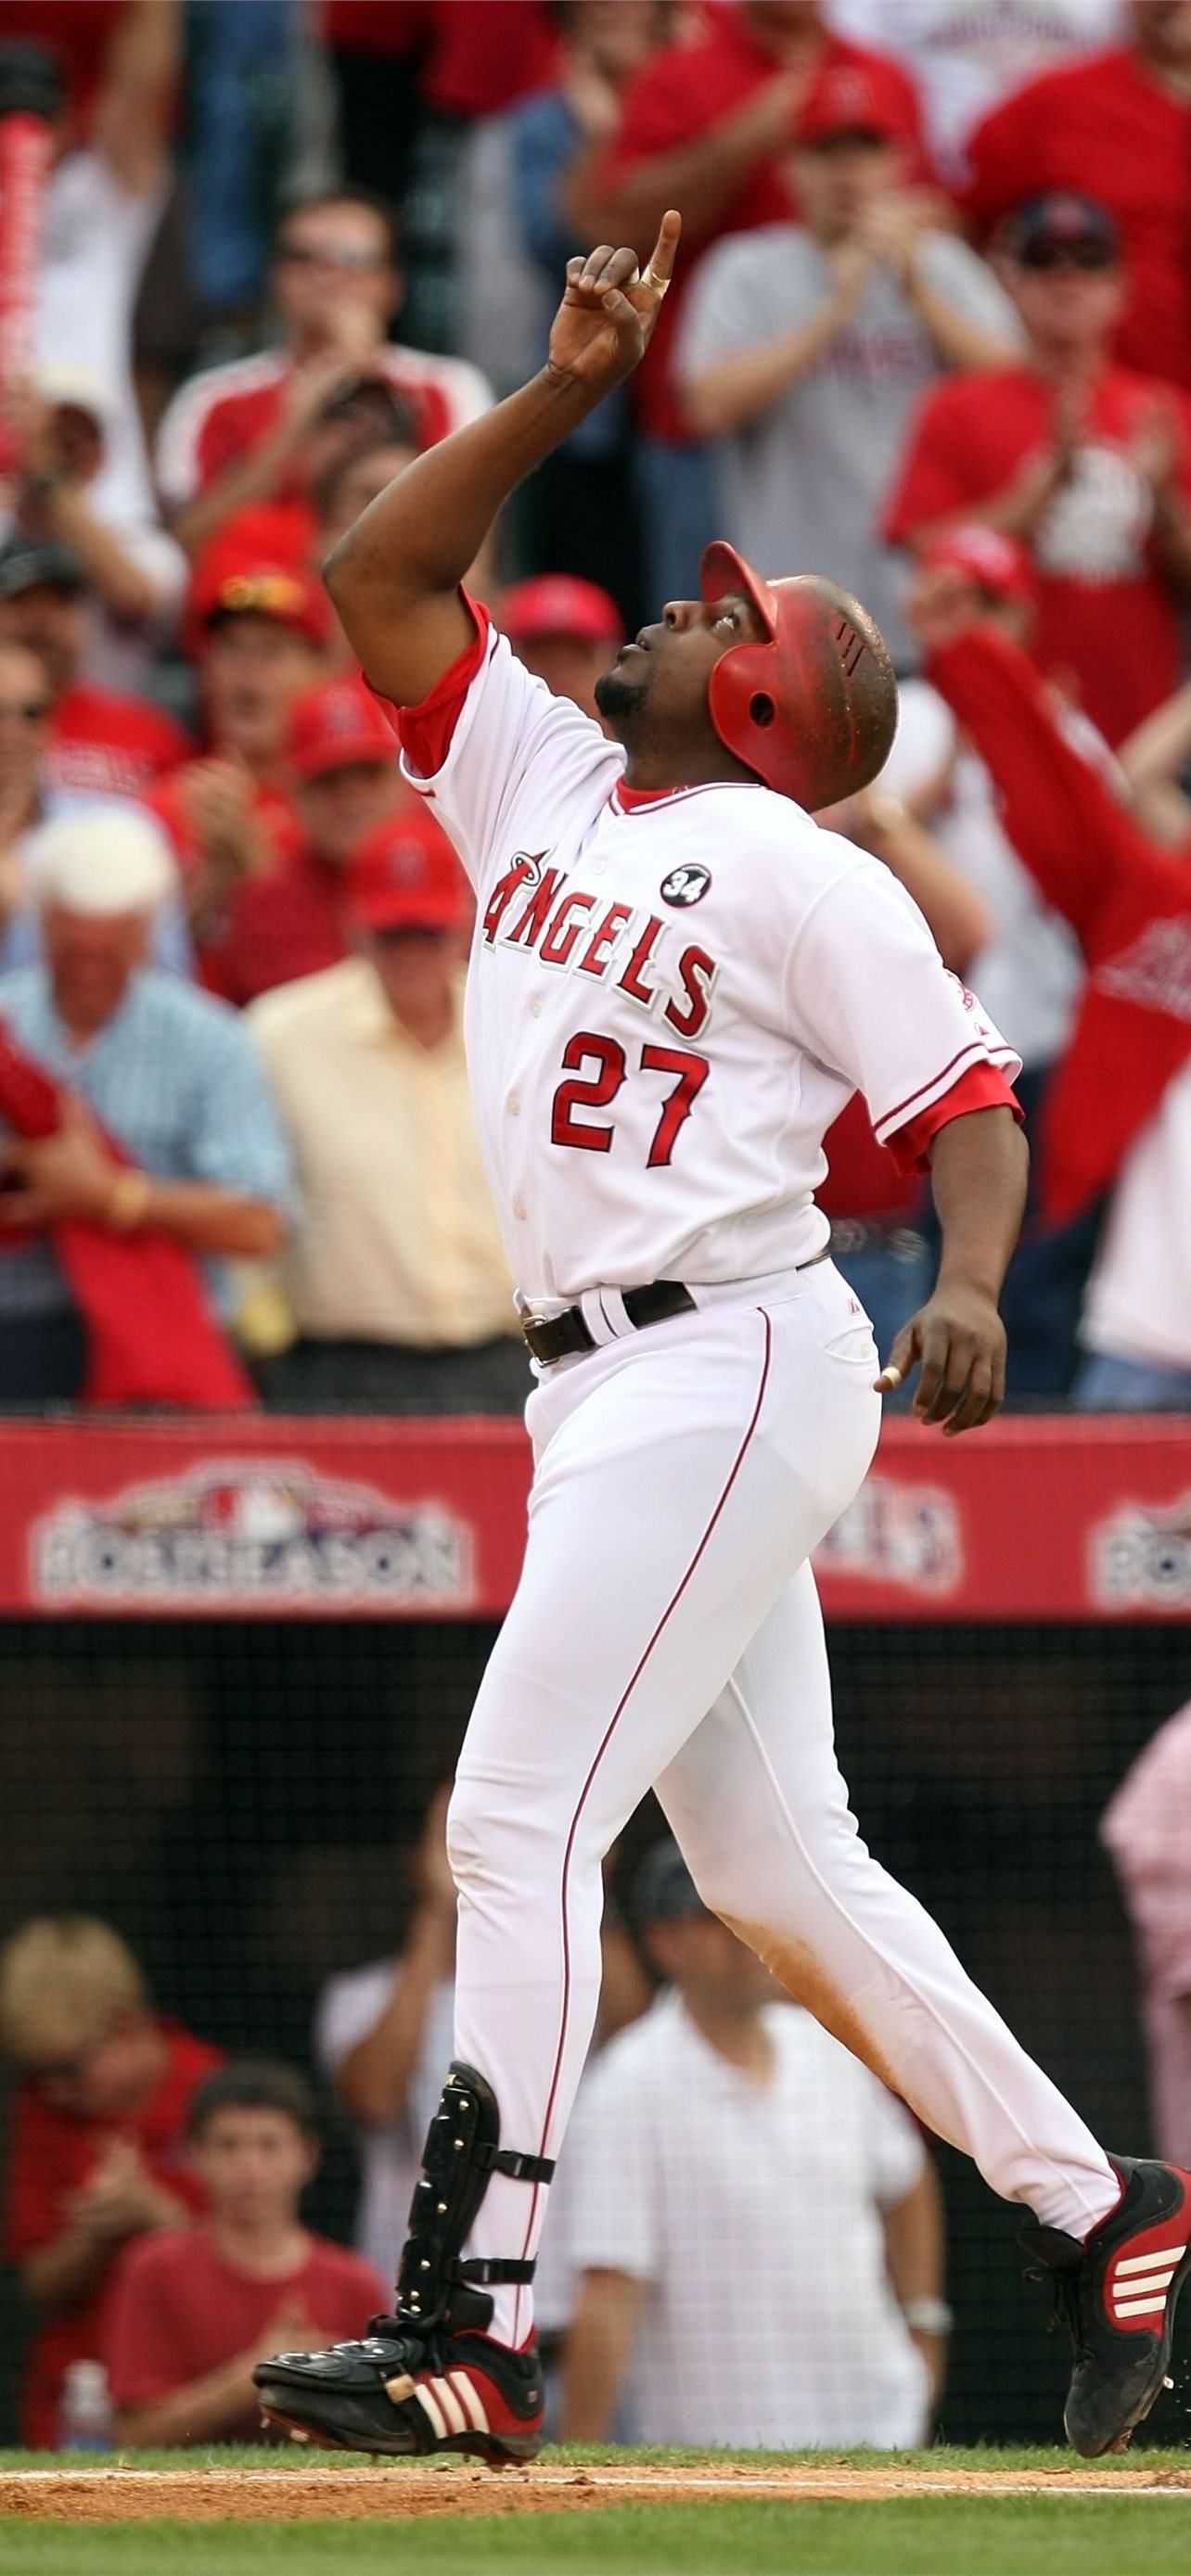 Los Angeles Angels iPhone wallpapers, Free downloads, Team spirit on display, Mobile customization, 1290x2780 HD Handy